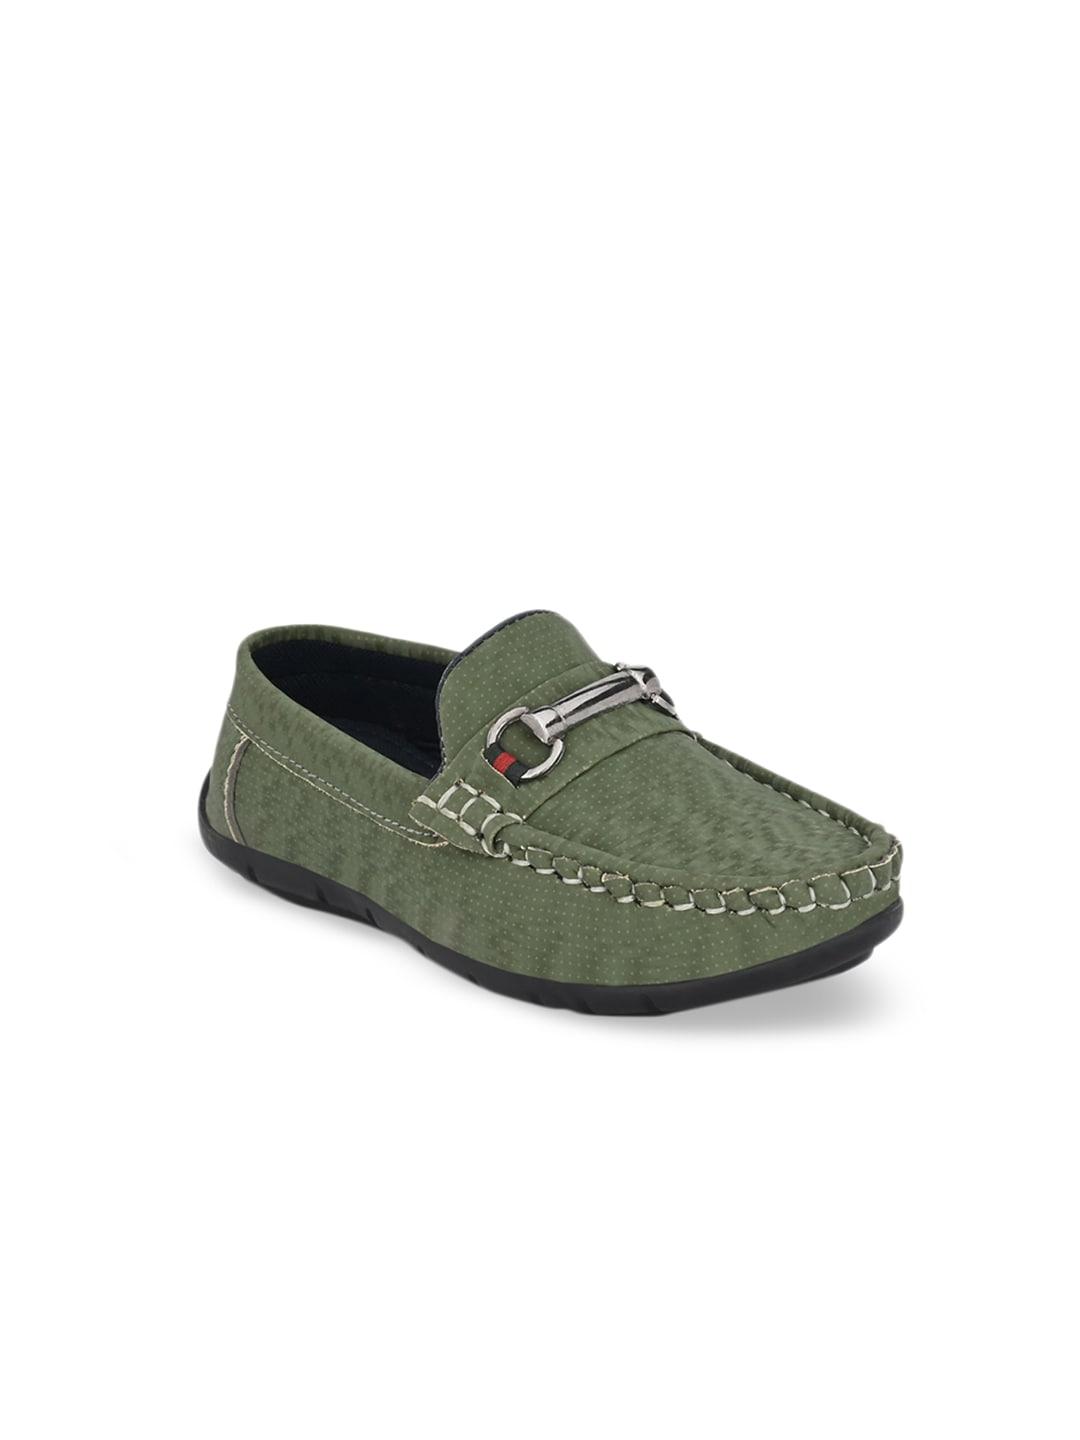 tuskey-boys-olive-green-woven-design-loafers